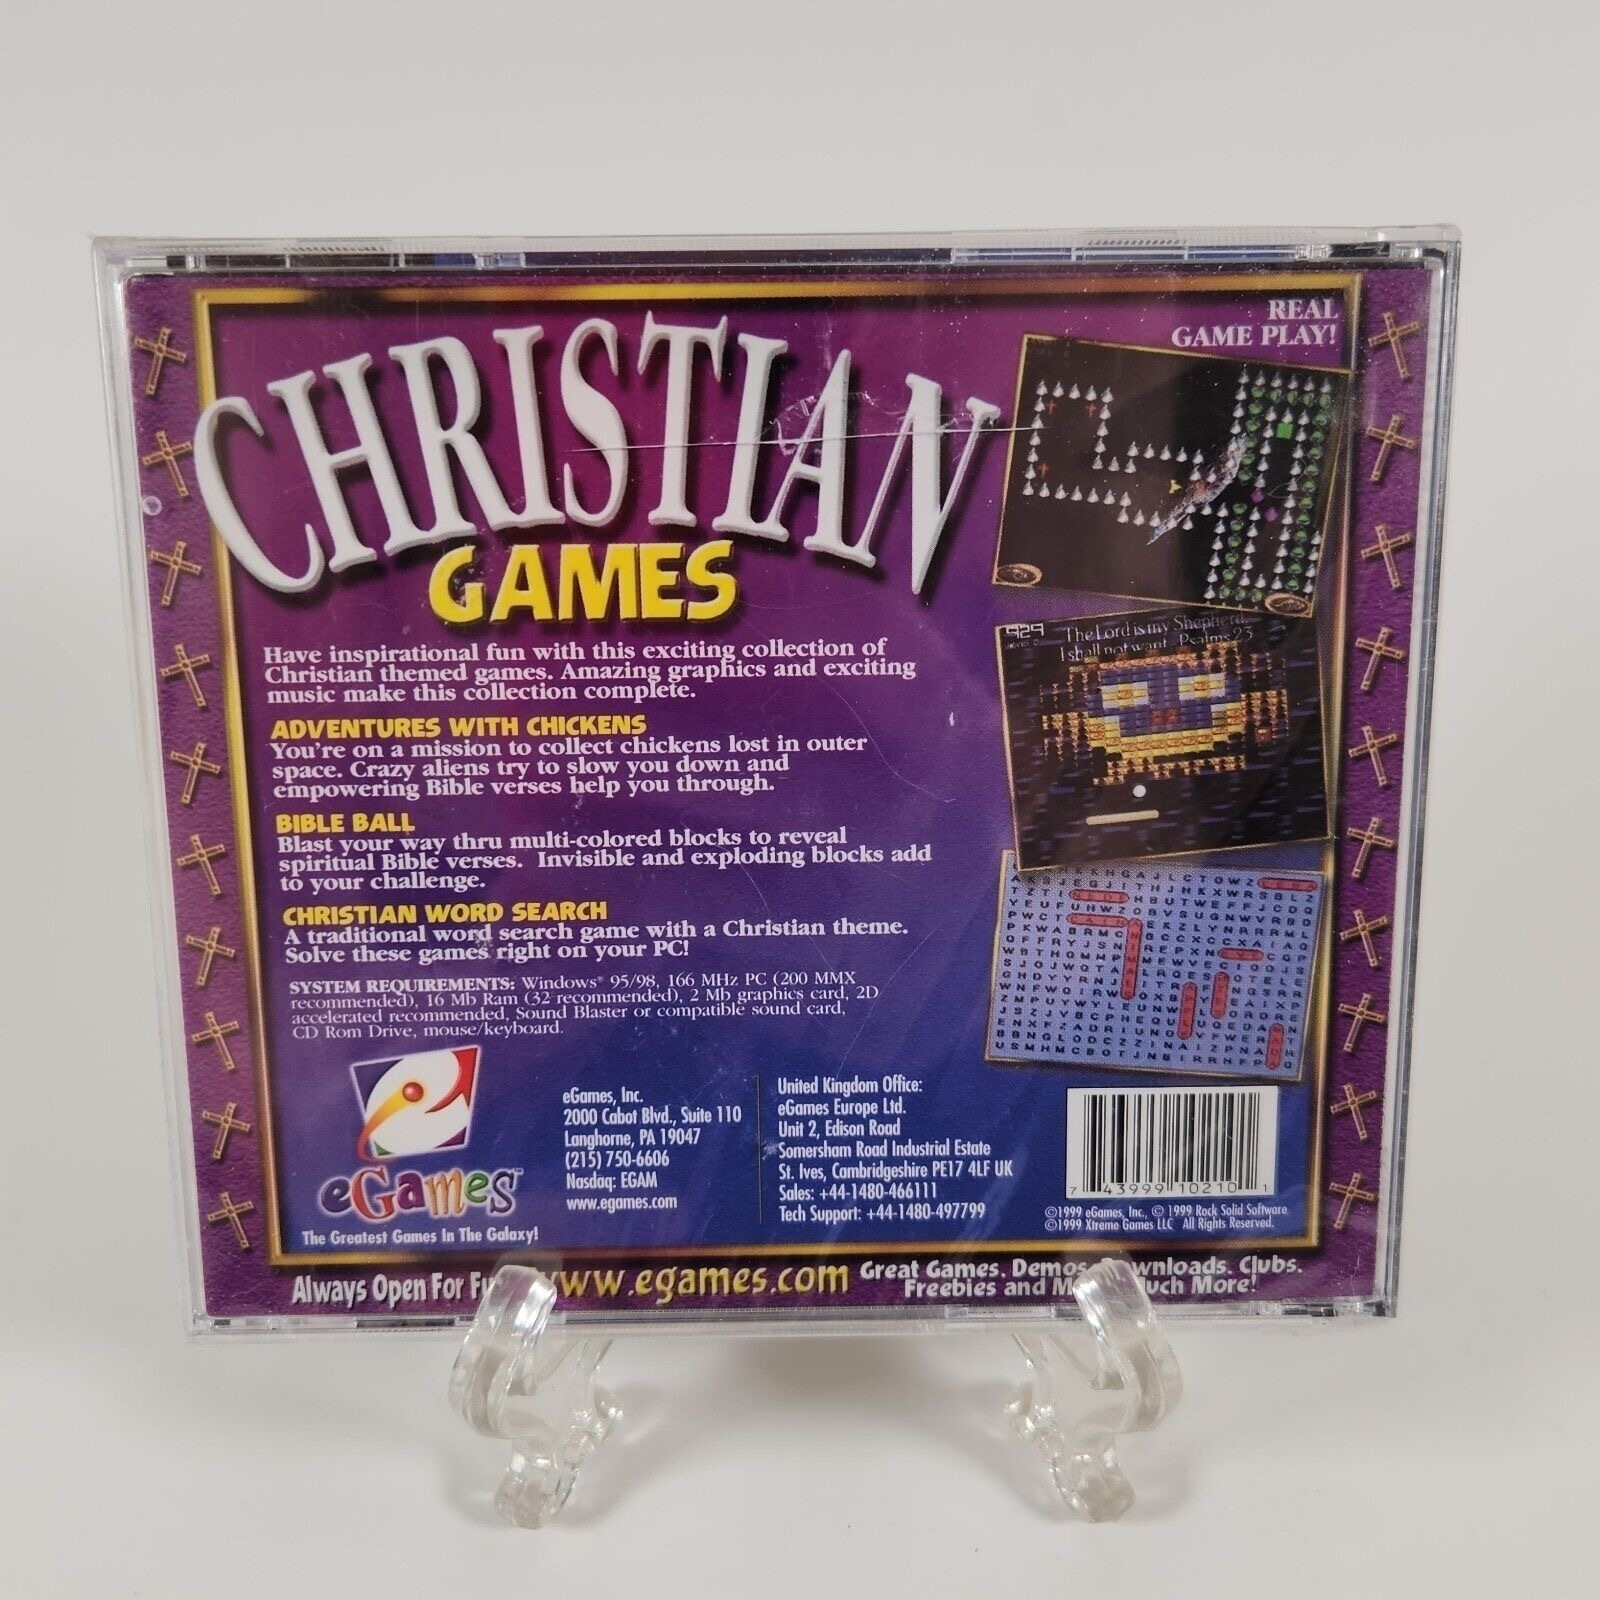 A boxed CD-ROM of "CHRISTIAN GAMES," detailing inspirational themed games, with descriptions and system requirements on the back cover.